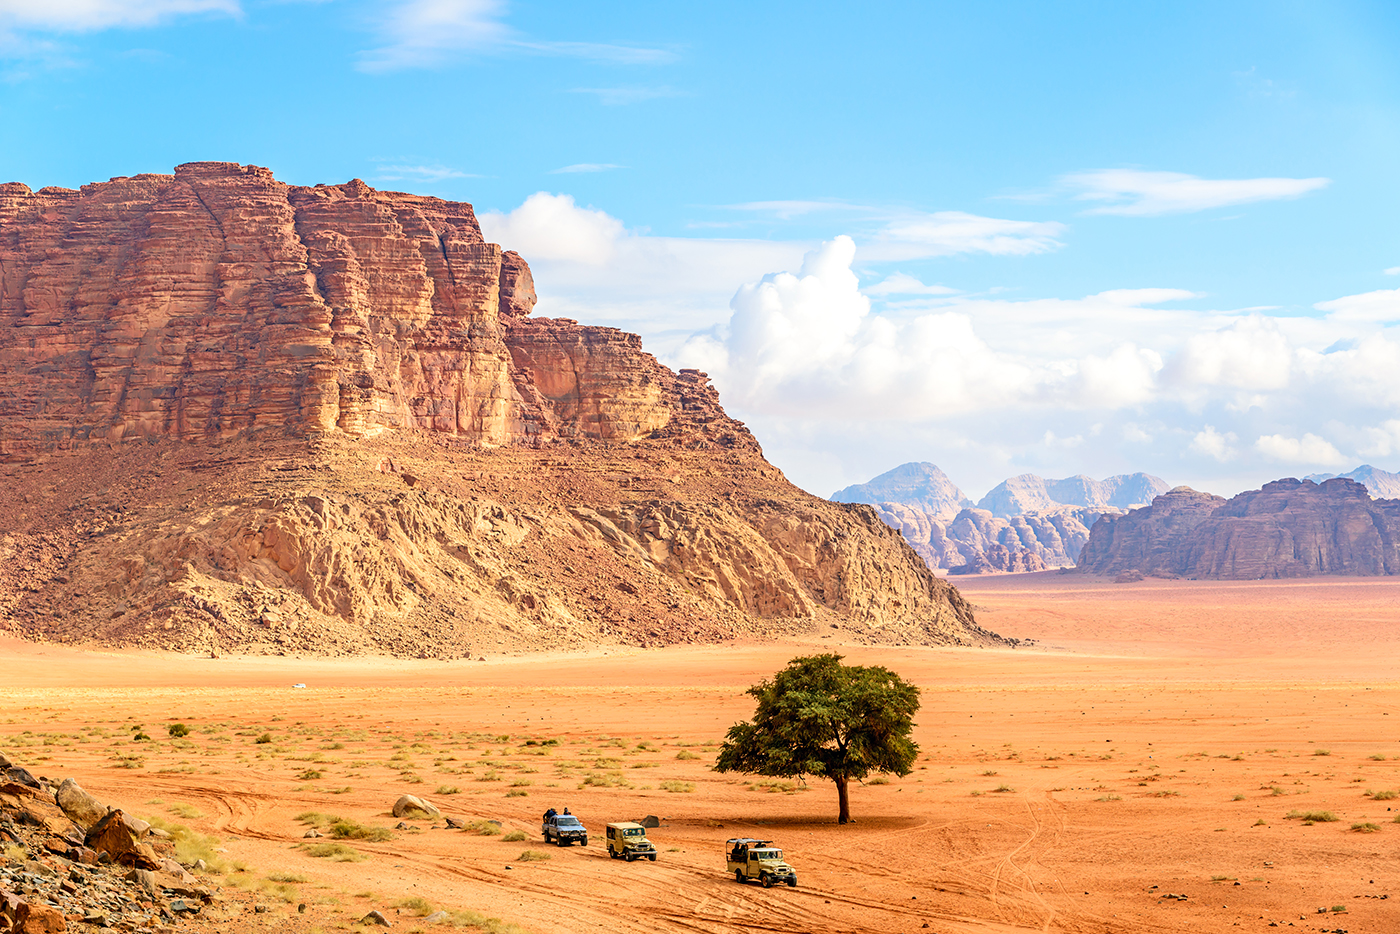 Jordanian desert in Wadi Rum, Jordan viewed from Lawrence's Spring. Wadi Rum is known as The Valley of the Moon and has led to its designation as a UNESCO World Heritage Site.